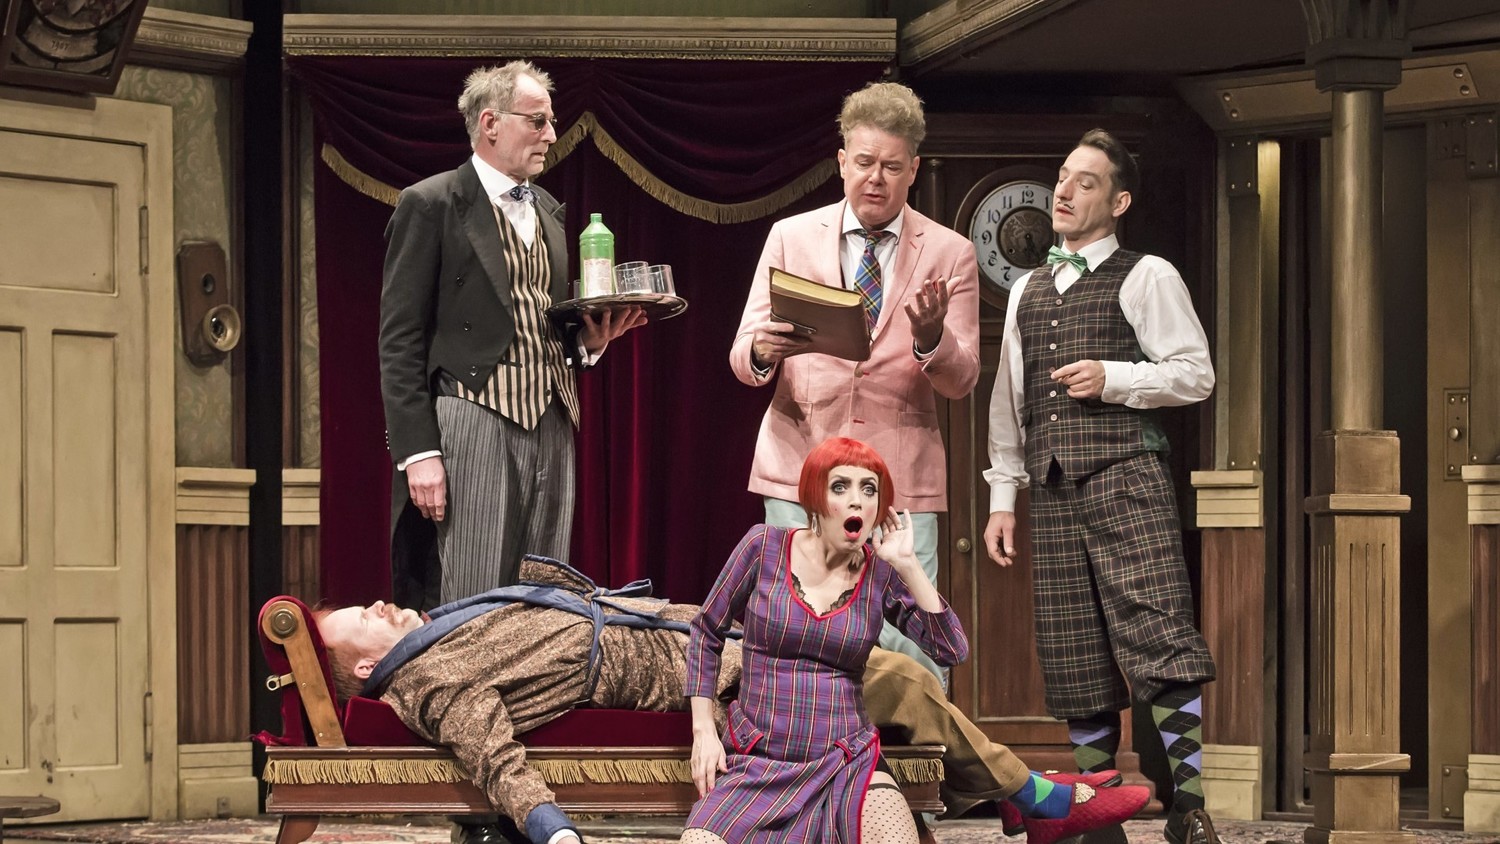 Review: THE PLAY THAT GOES WRONG at Renaissance Theater Berlin - Great Cast. Great Farce. Great Fun! 